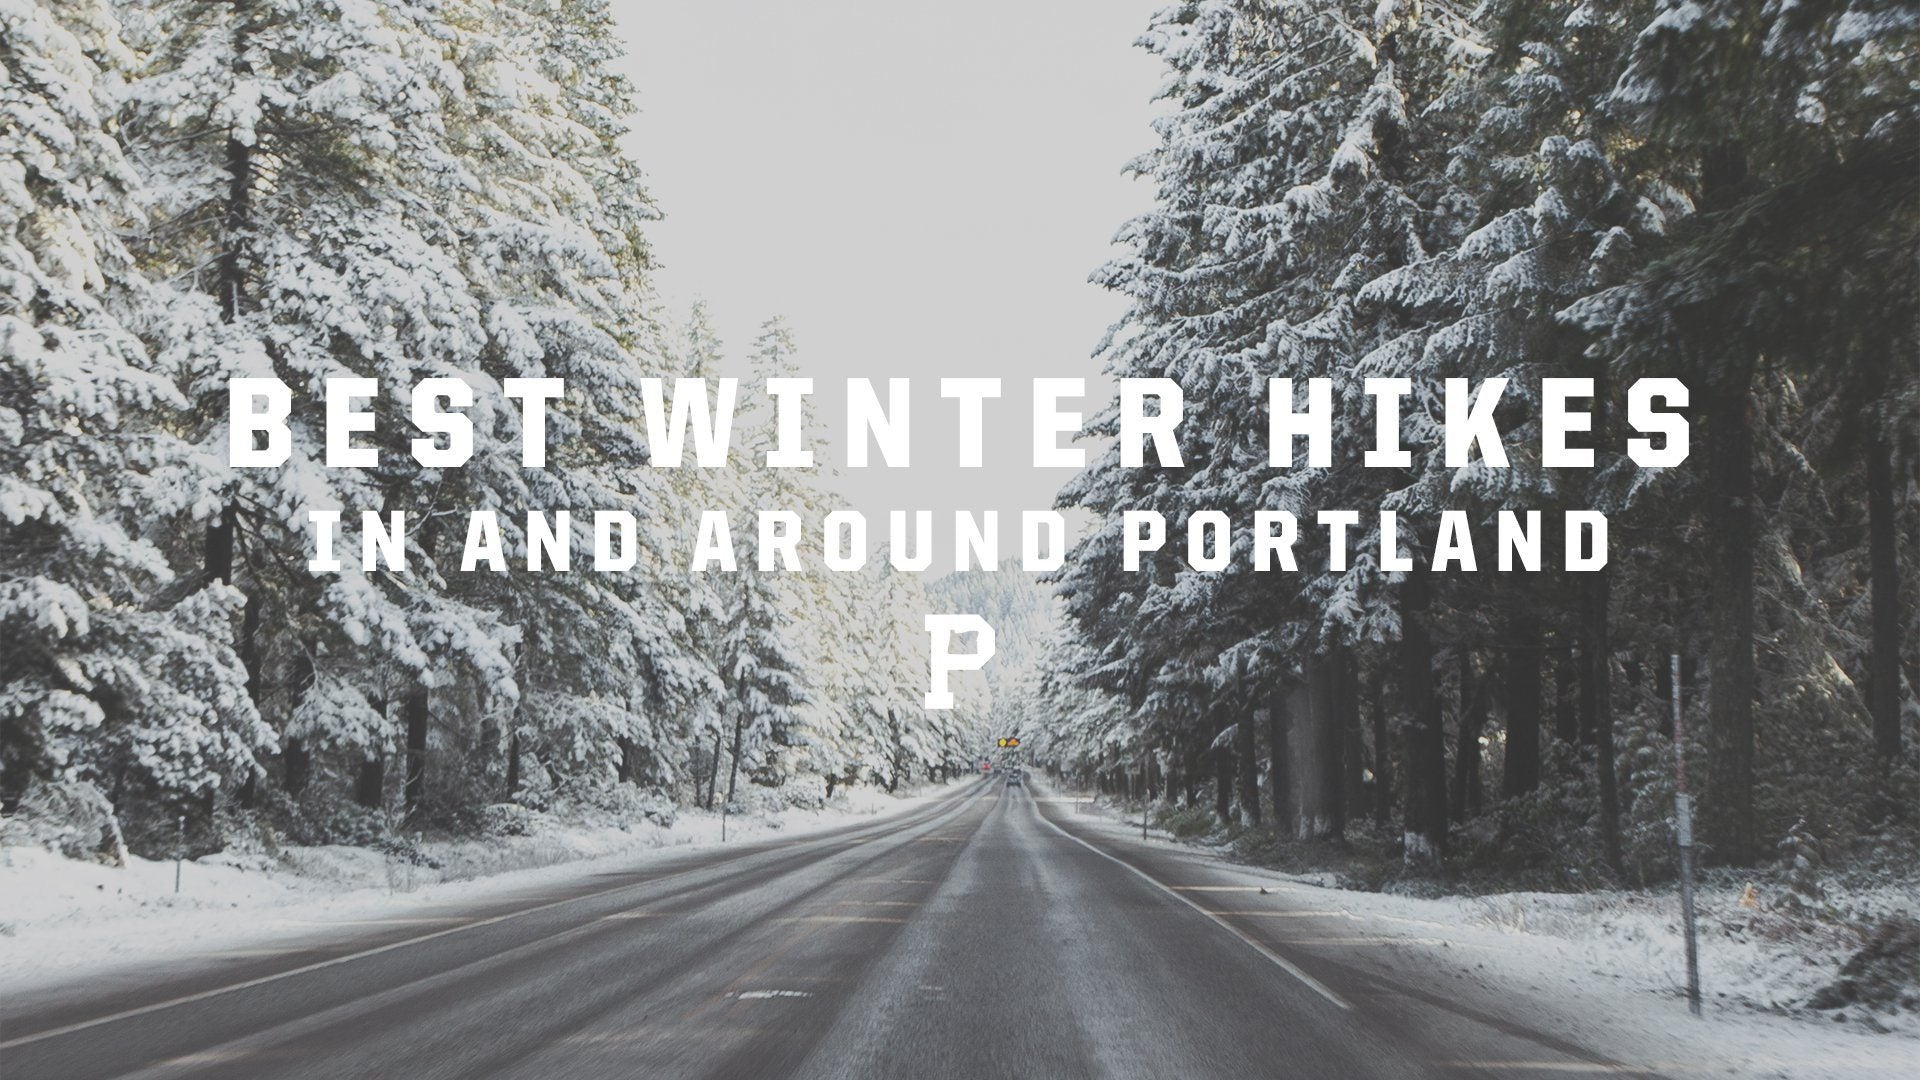 Best Winter Hikes in and around Portland. - Portland Gear